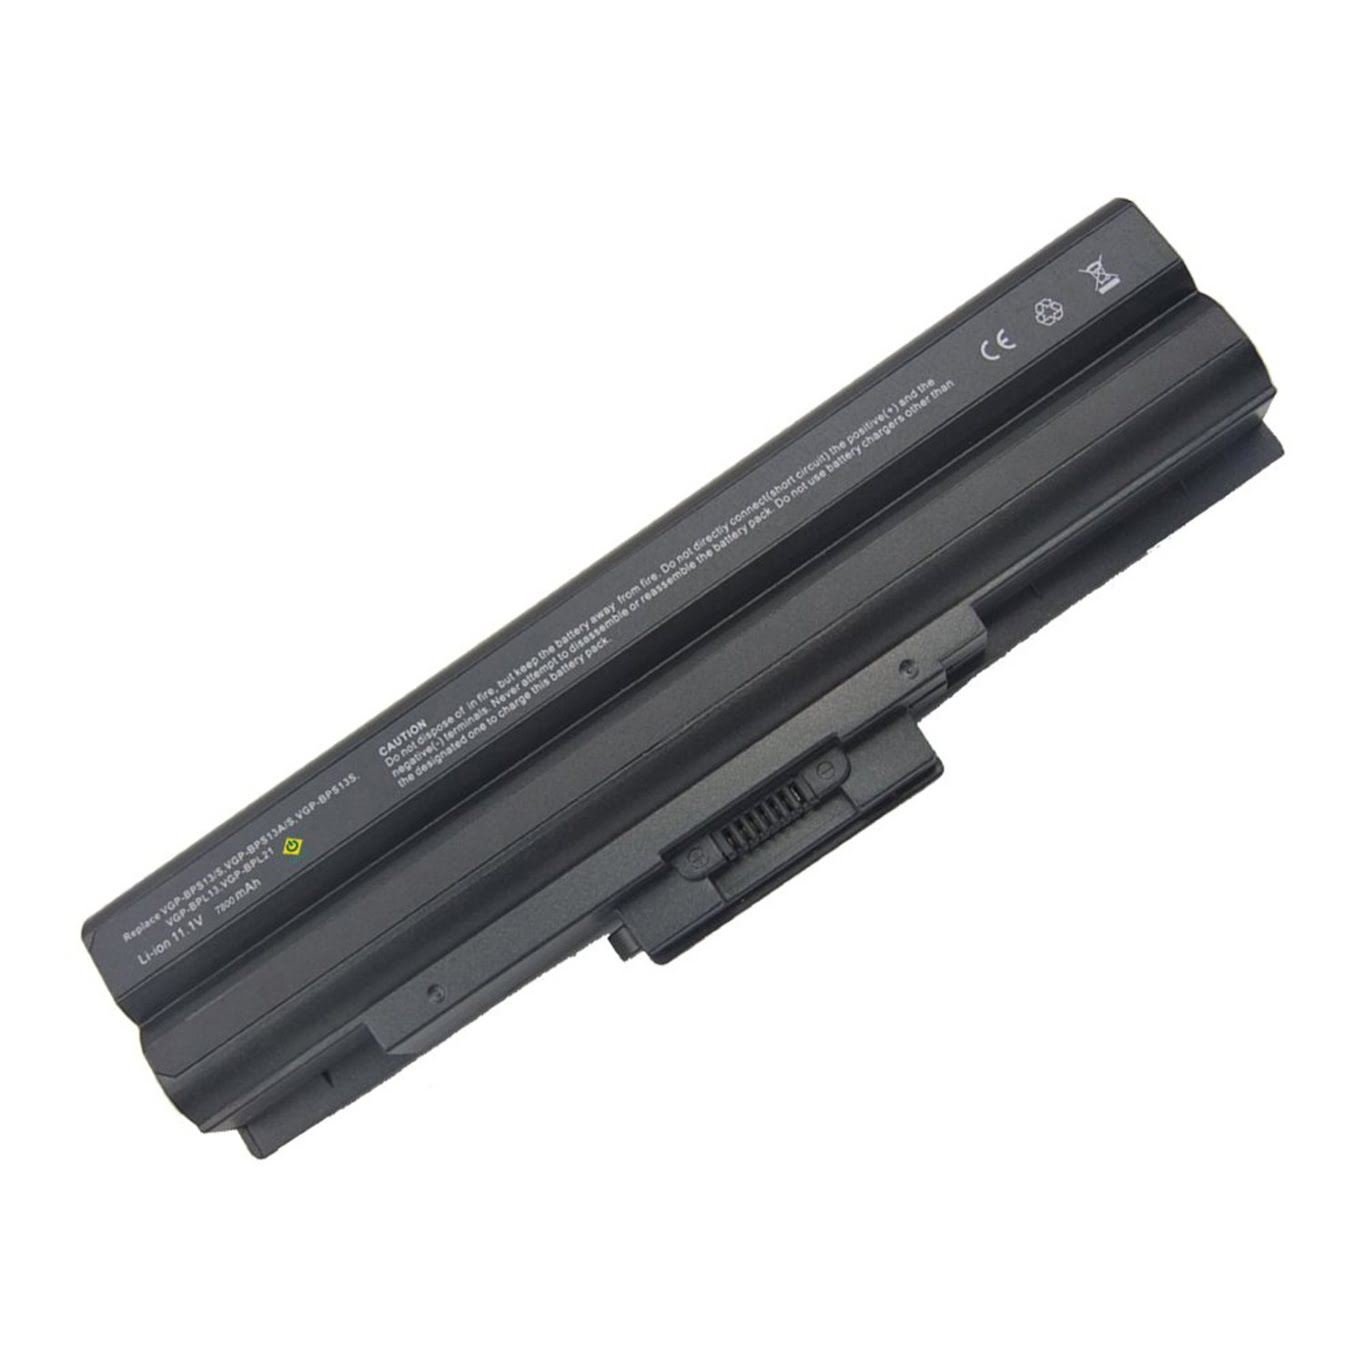 VGP-BPL13, VGP-BPL21 replacement Laptop Battery for Sony VAIO VGN-AW11M/H, VAIO VGN-AW11S/B, 11.1V, 9 cells, 6600mAh